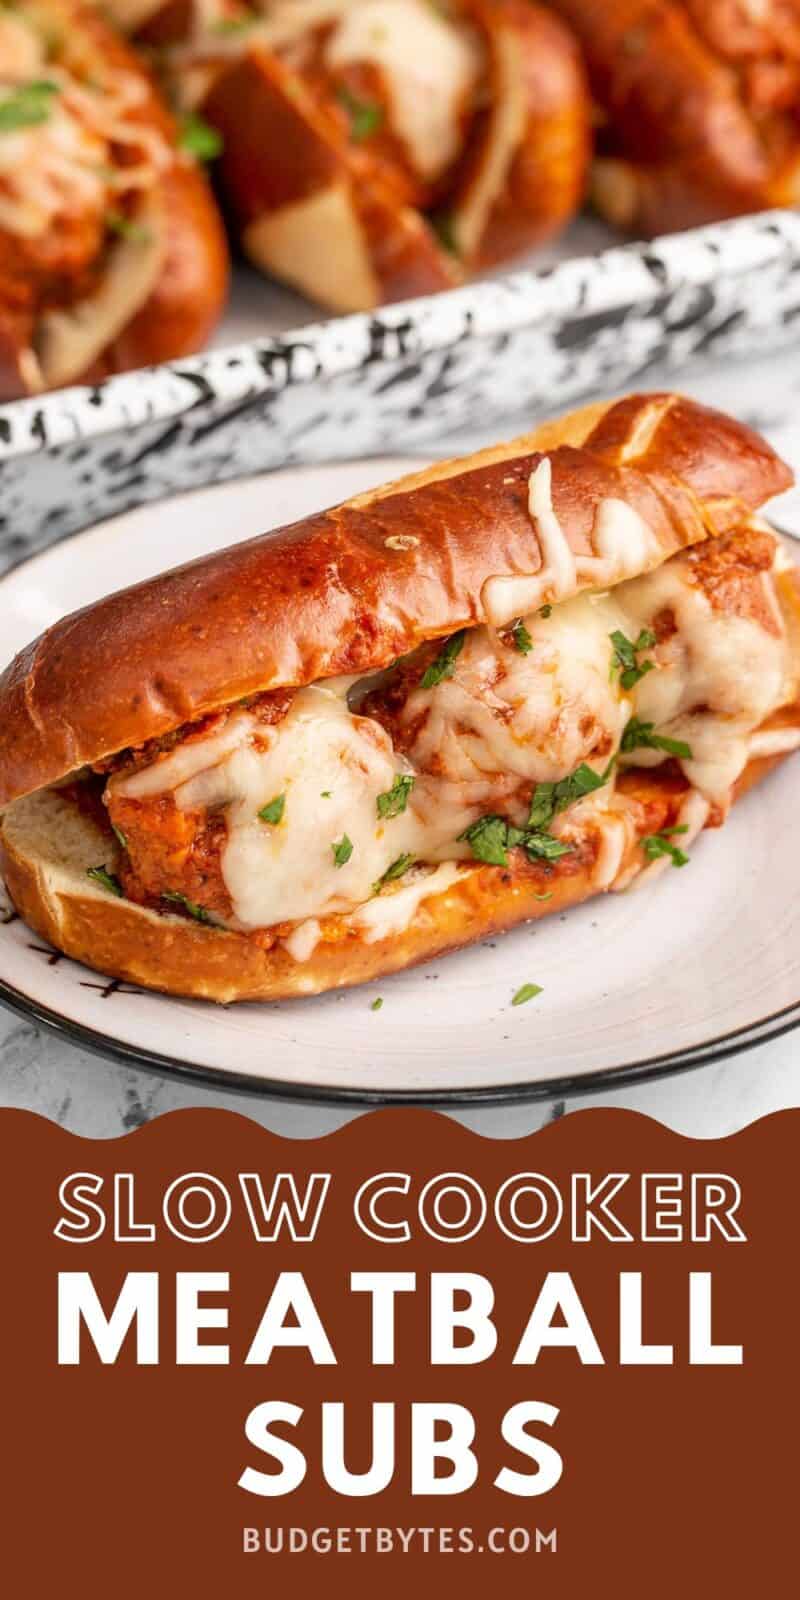 Side view of a meatball sub on a plate with a baking dish in the back.